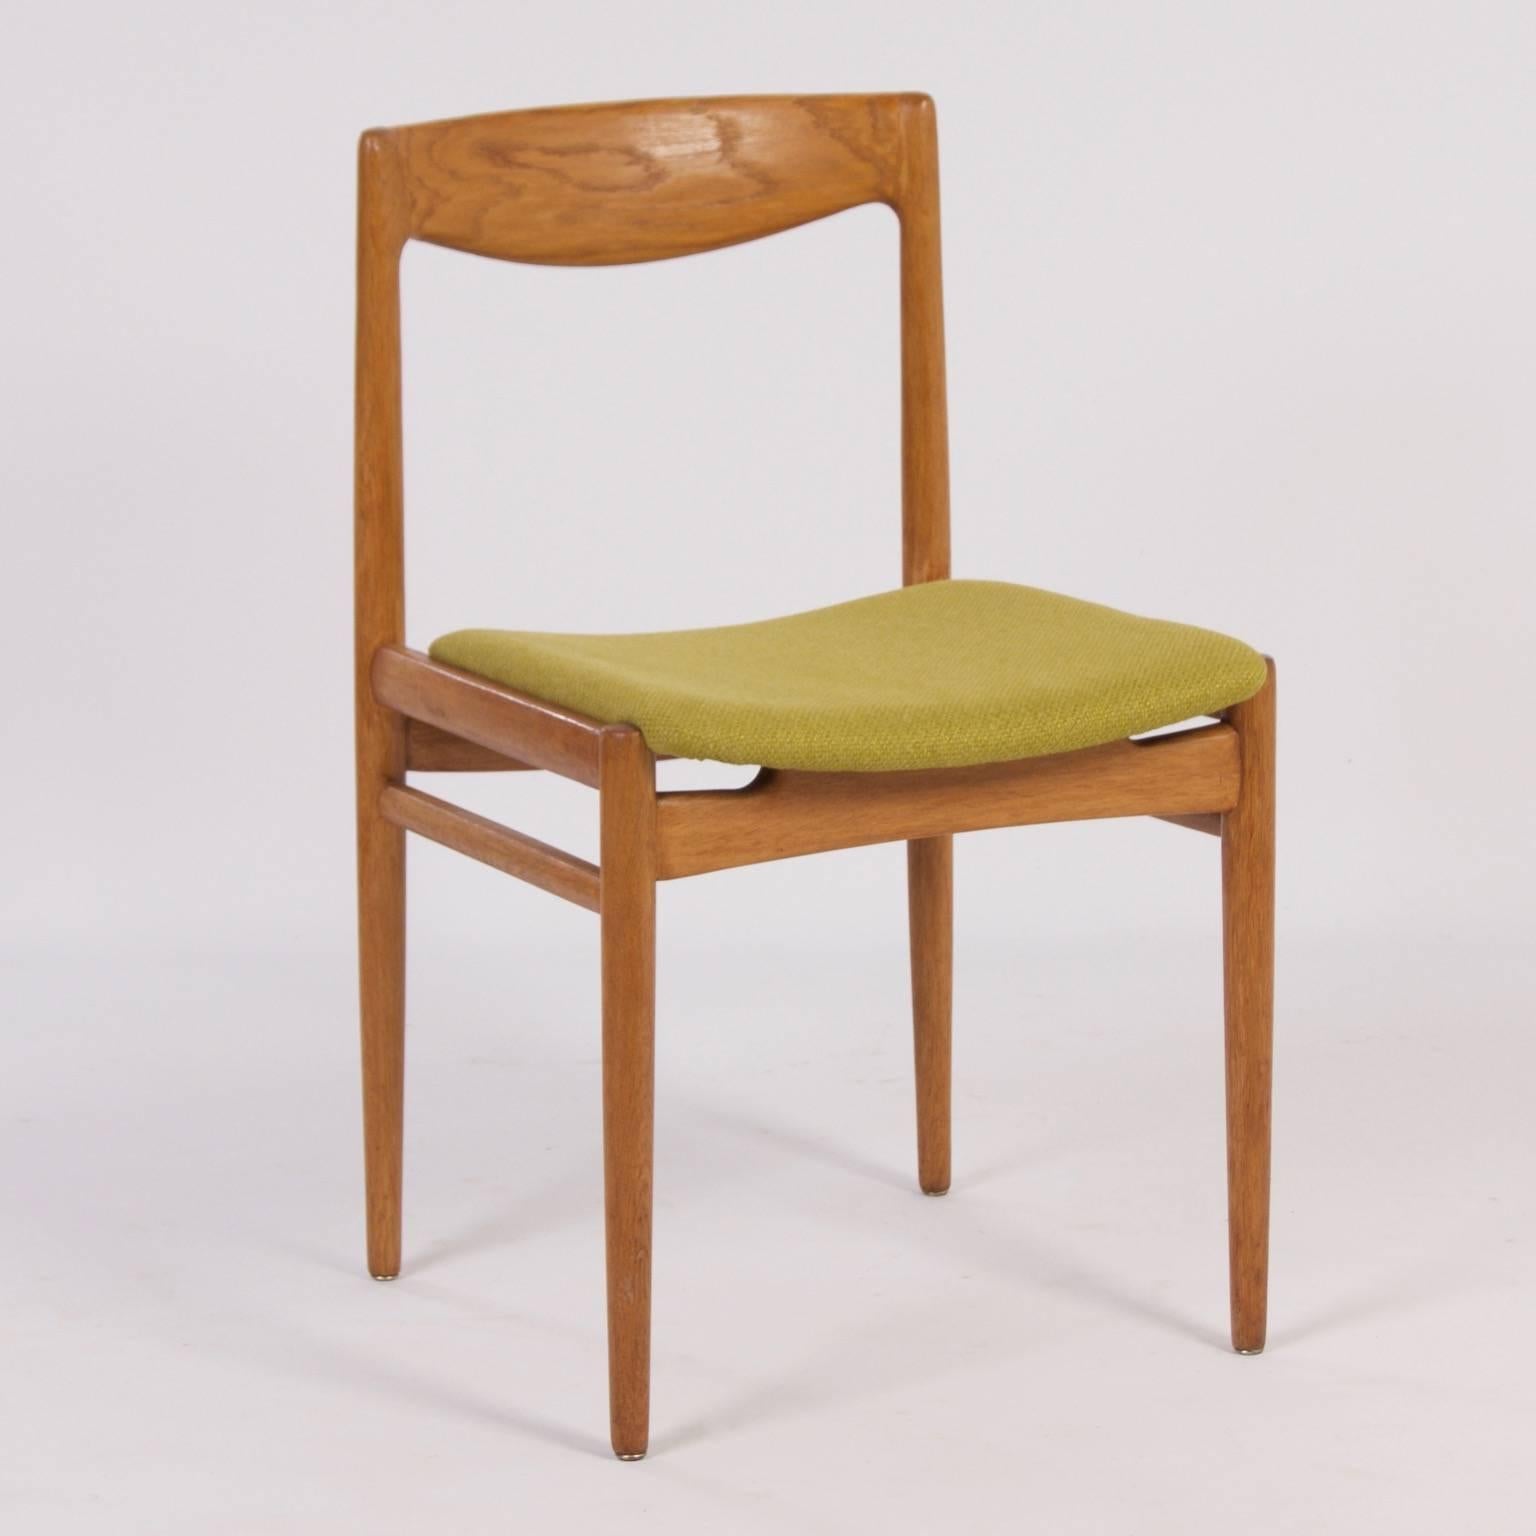 Green Danish Dining Chairs in the Style of Møller, Denmark, 1960s For Sale 1